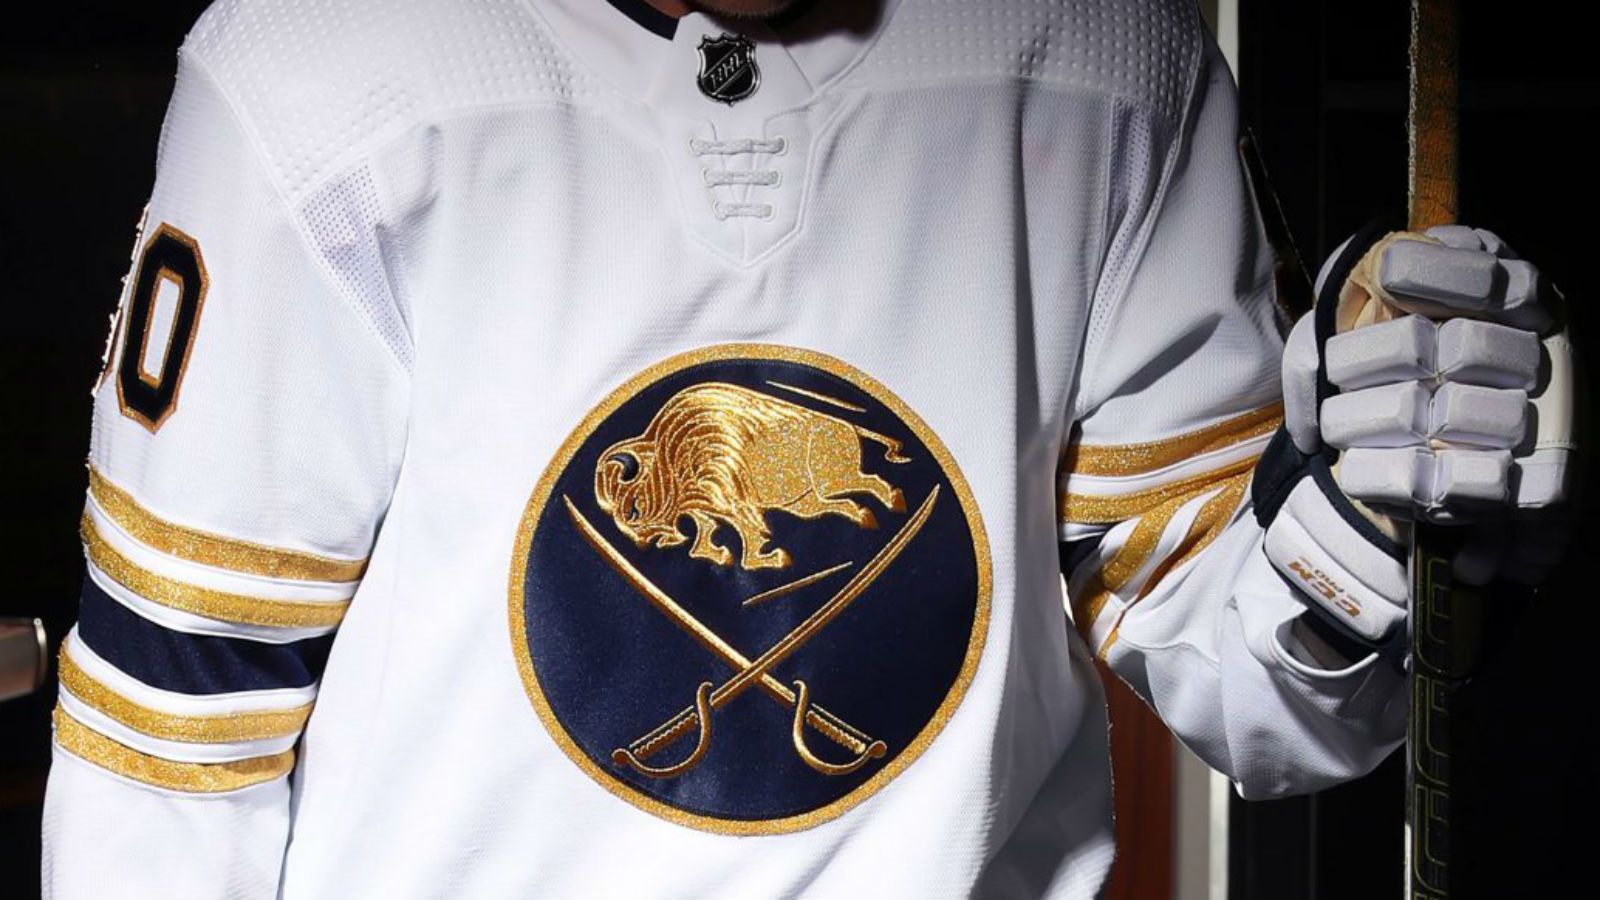 Twitter reacts to Buffalo Sabres' new royal blue jerseys